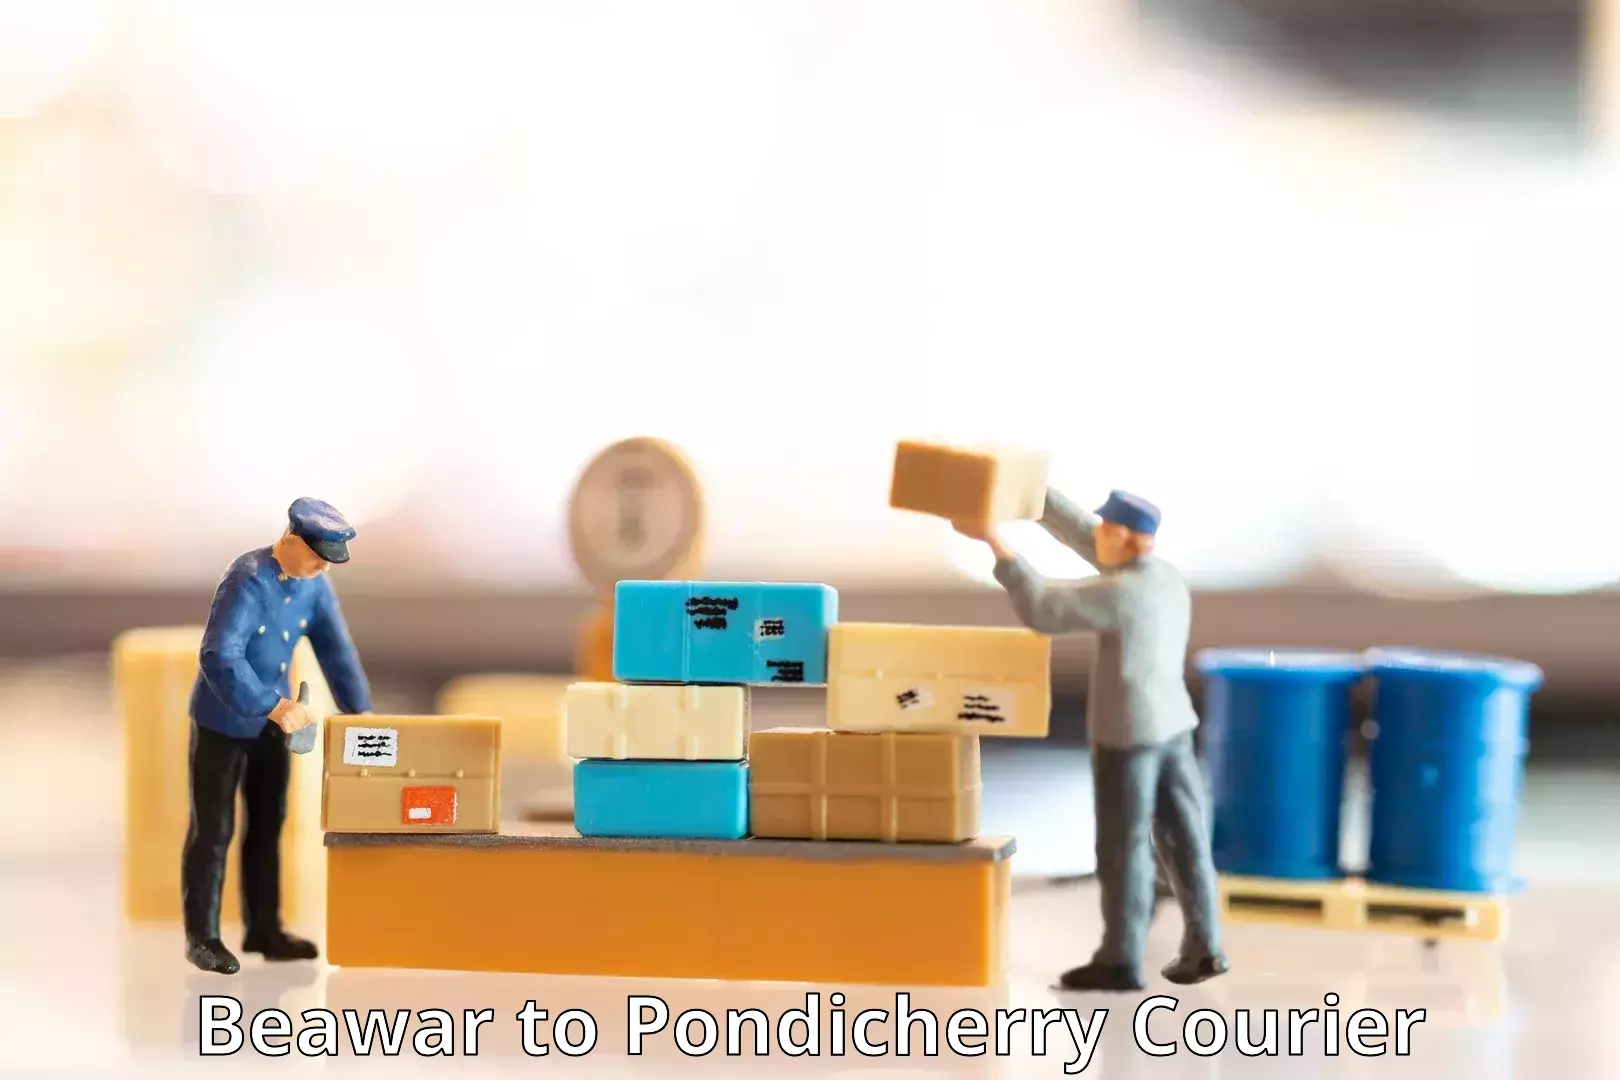 On-call courier service Beawar to Pondicherry University